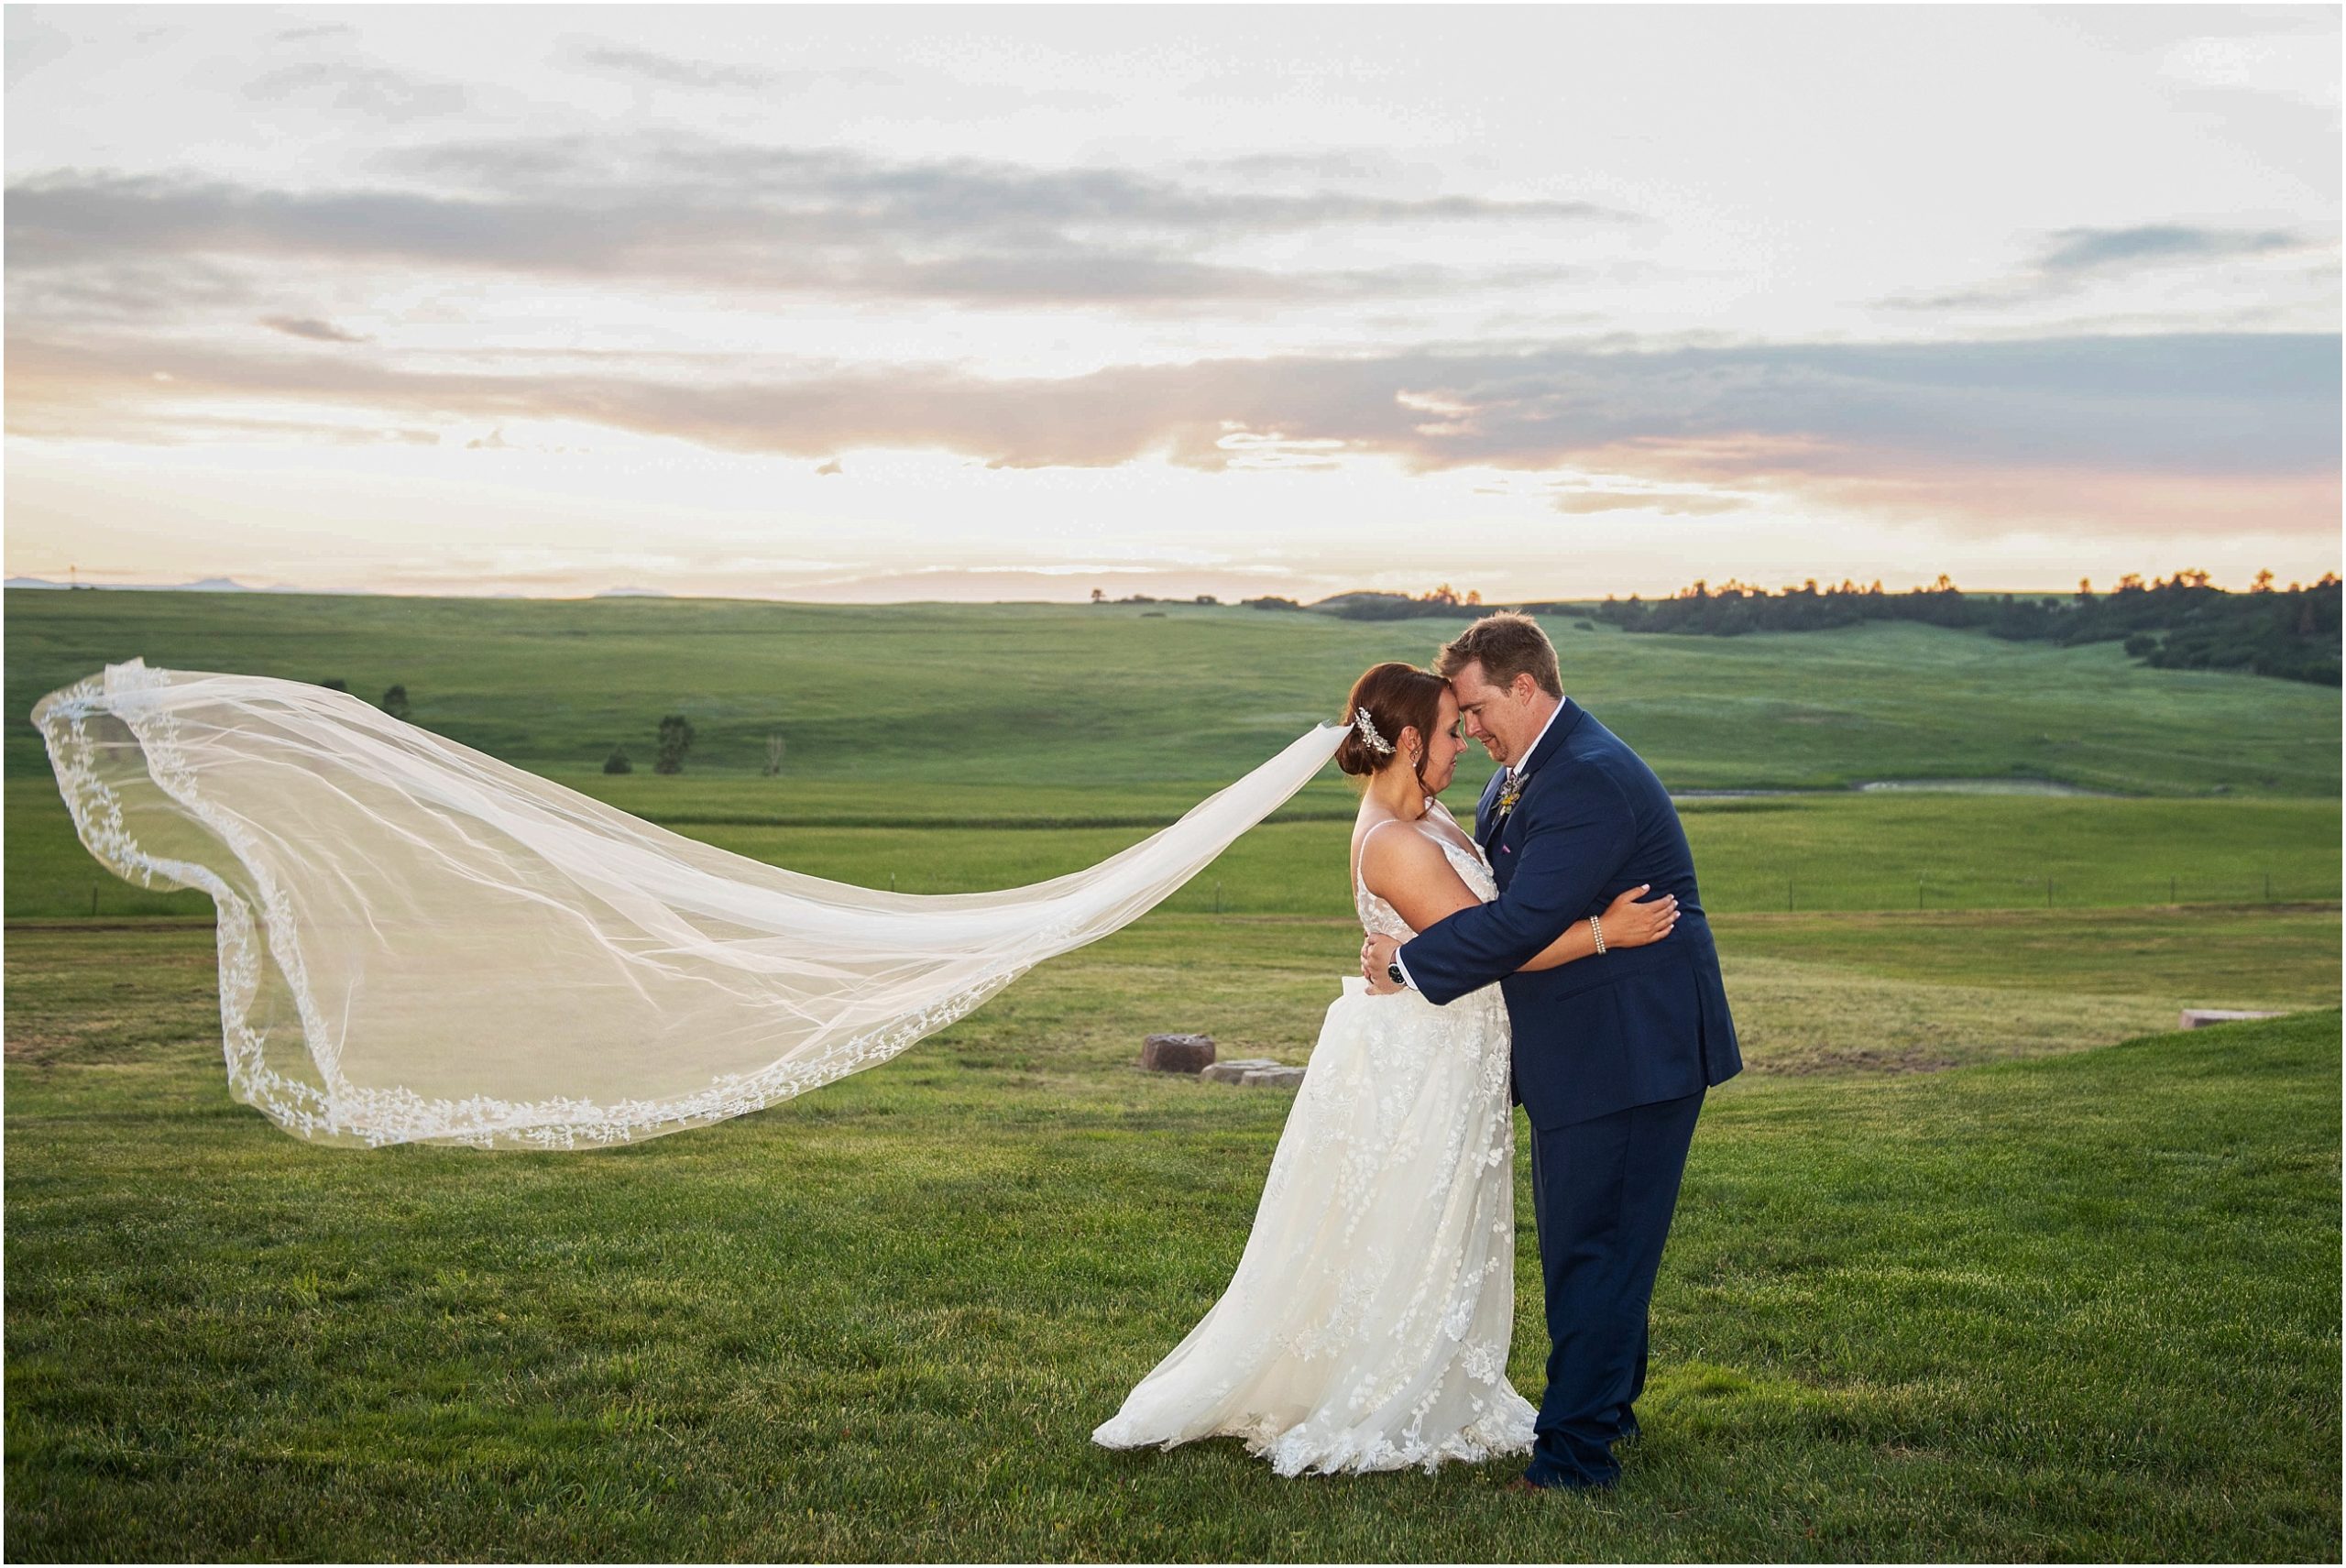 Bride and groom pose for a stunning photo with the bride's veil swooping behind her on this Colorado summer evening